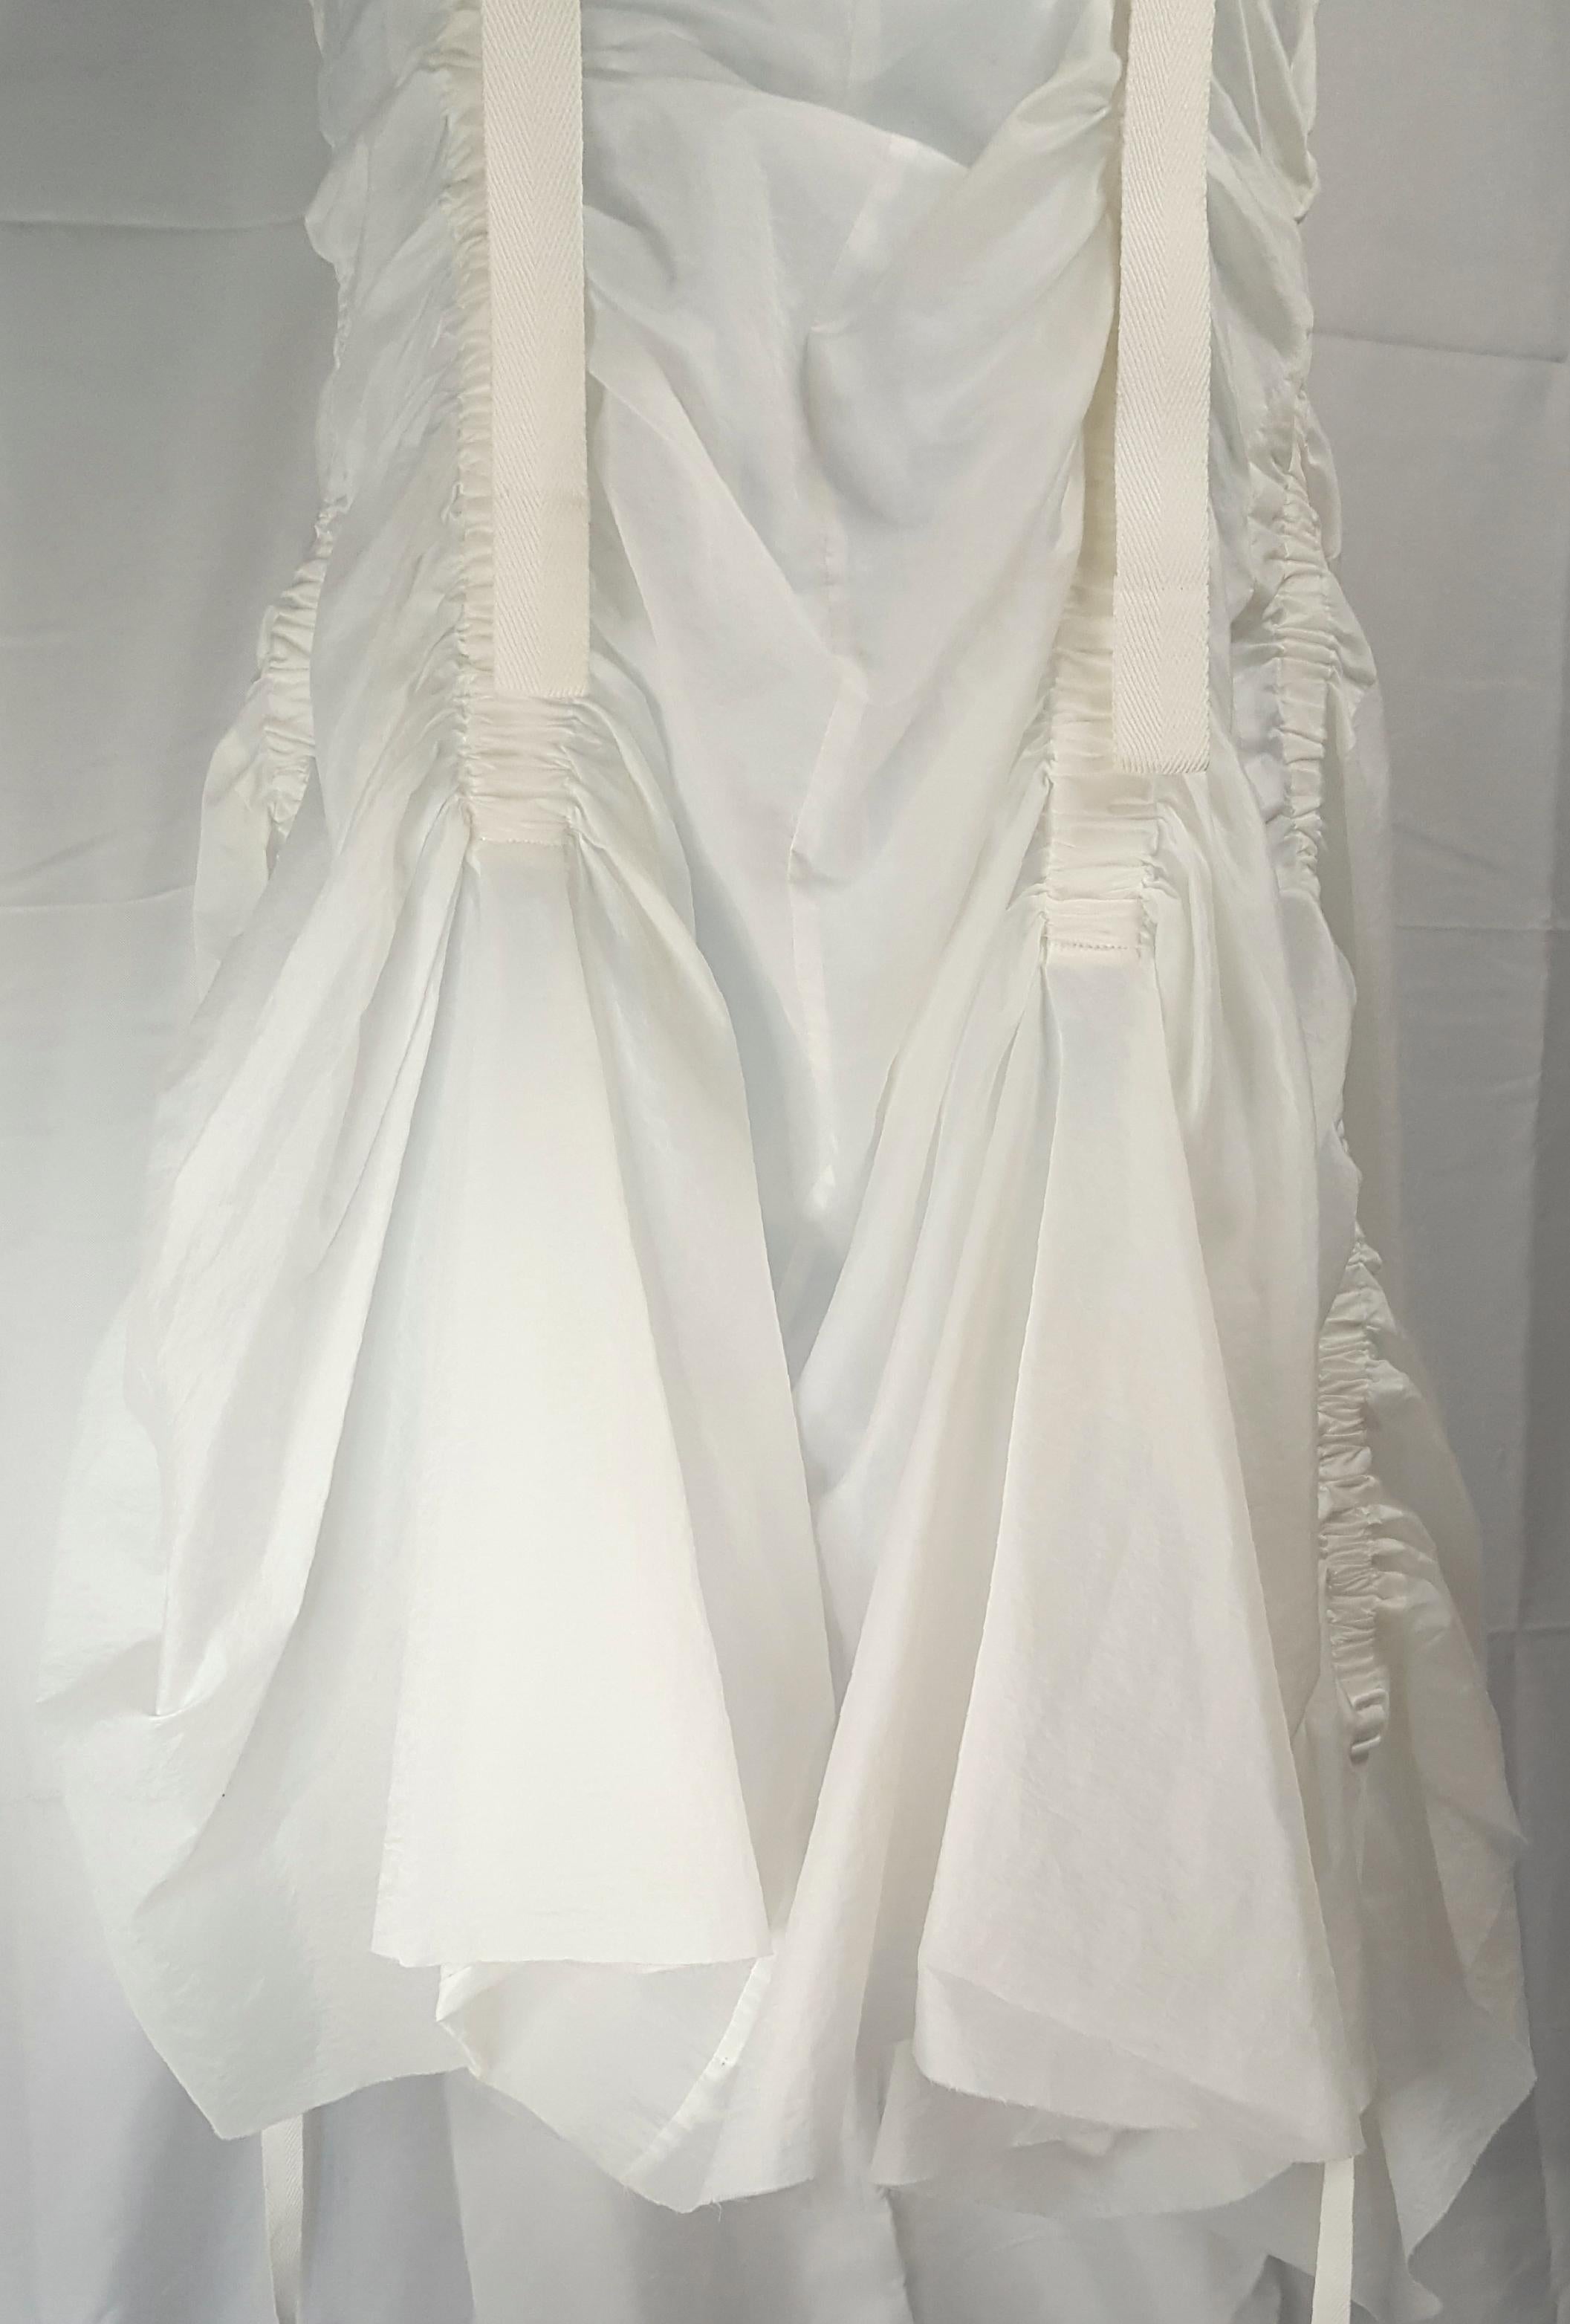 JunyaWantanabe 2003 RunwayLook1 Ruched Parachute Convertible White Dress Gown For Sale 1